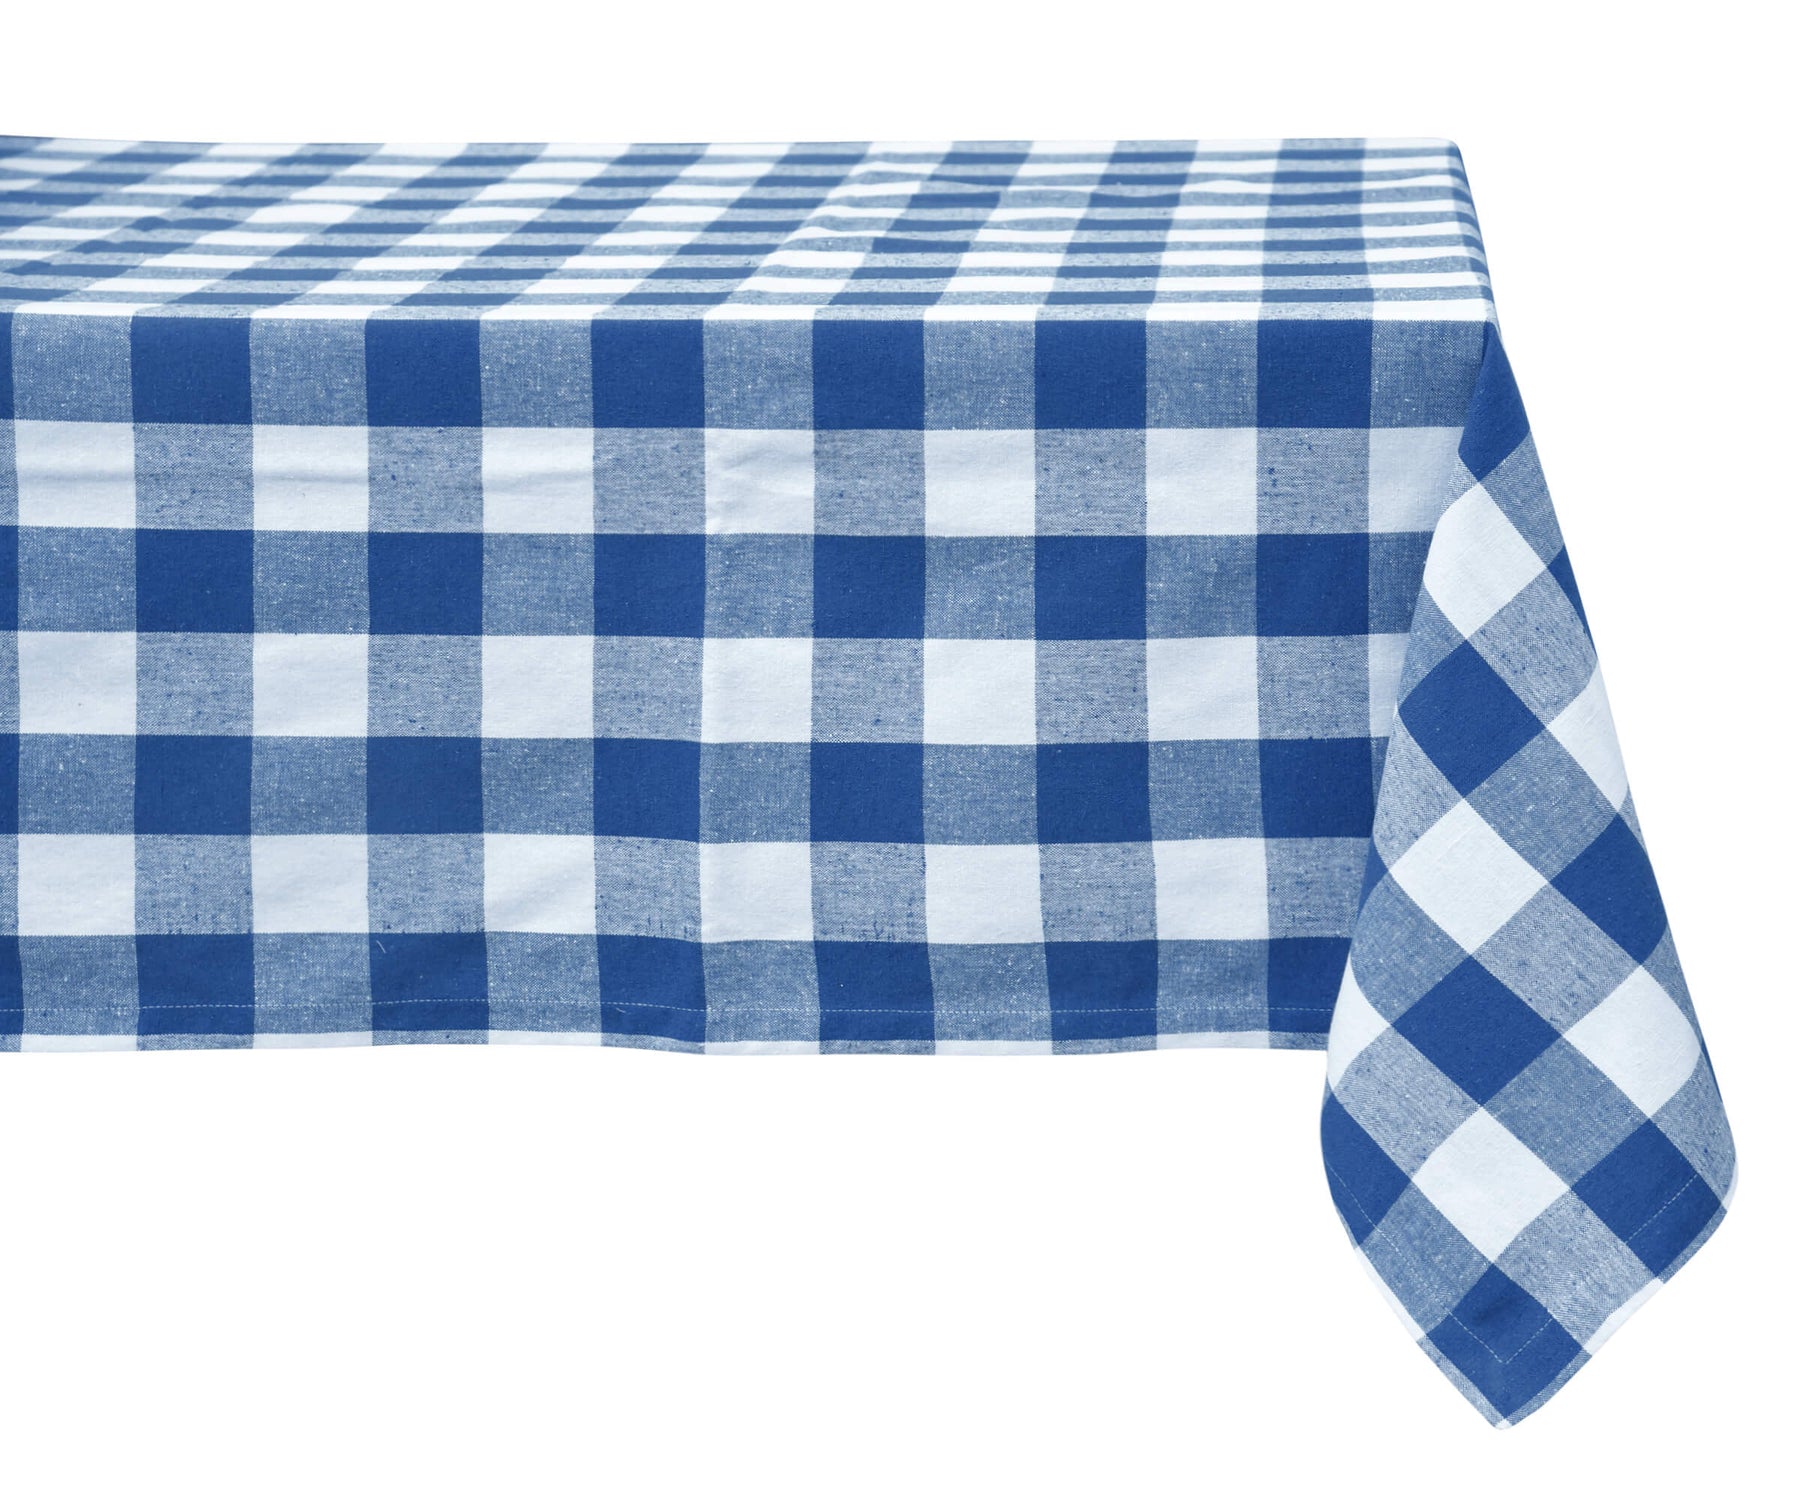 A blue and white tablecloth combines the classic appeal of blue with the freshness of white, creating a timeless and charming look.